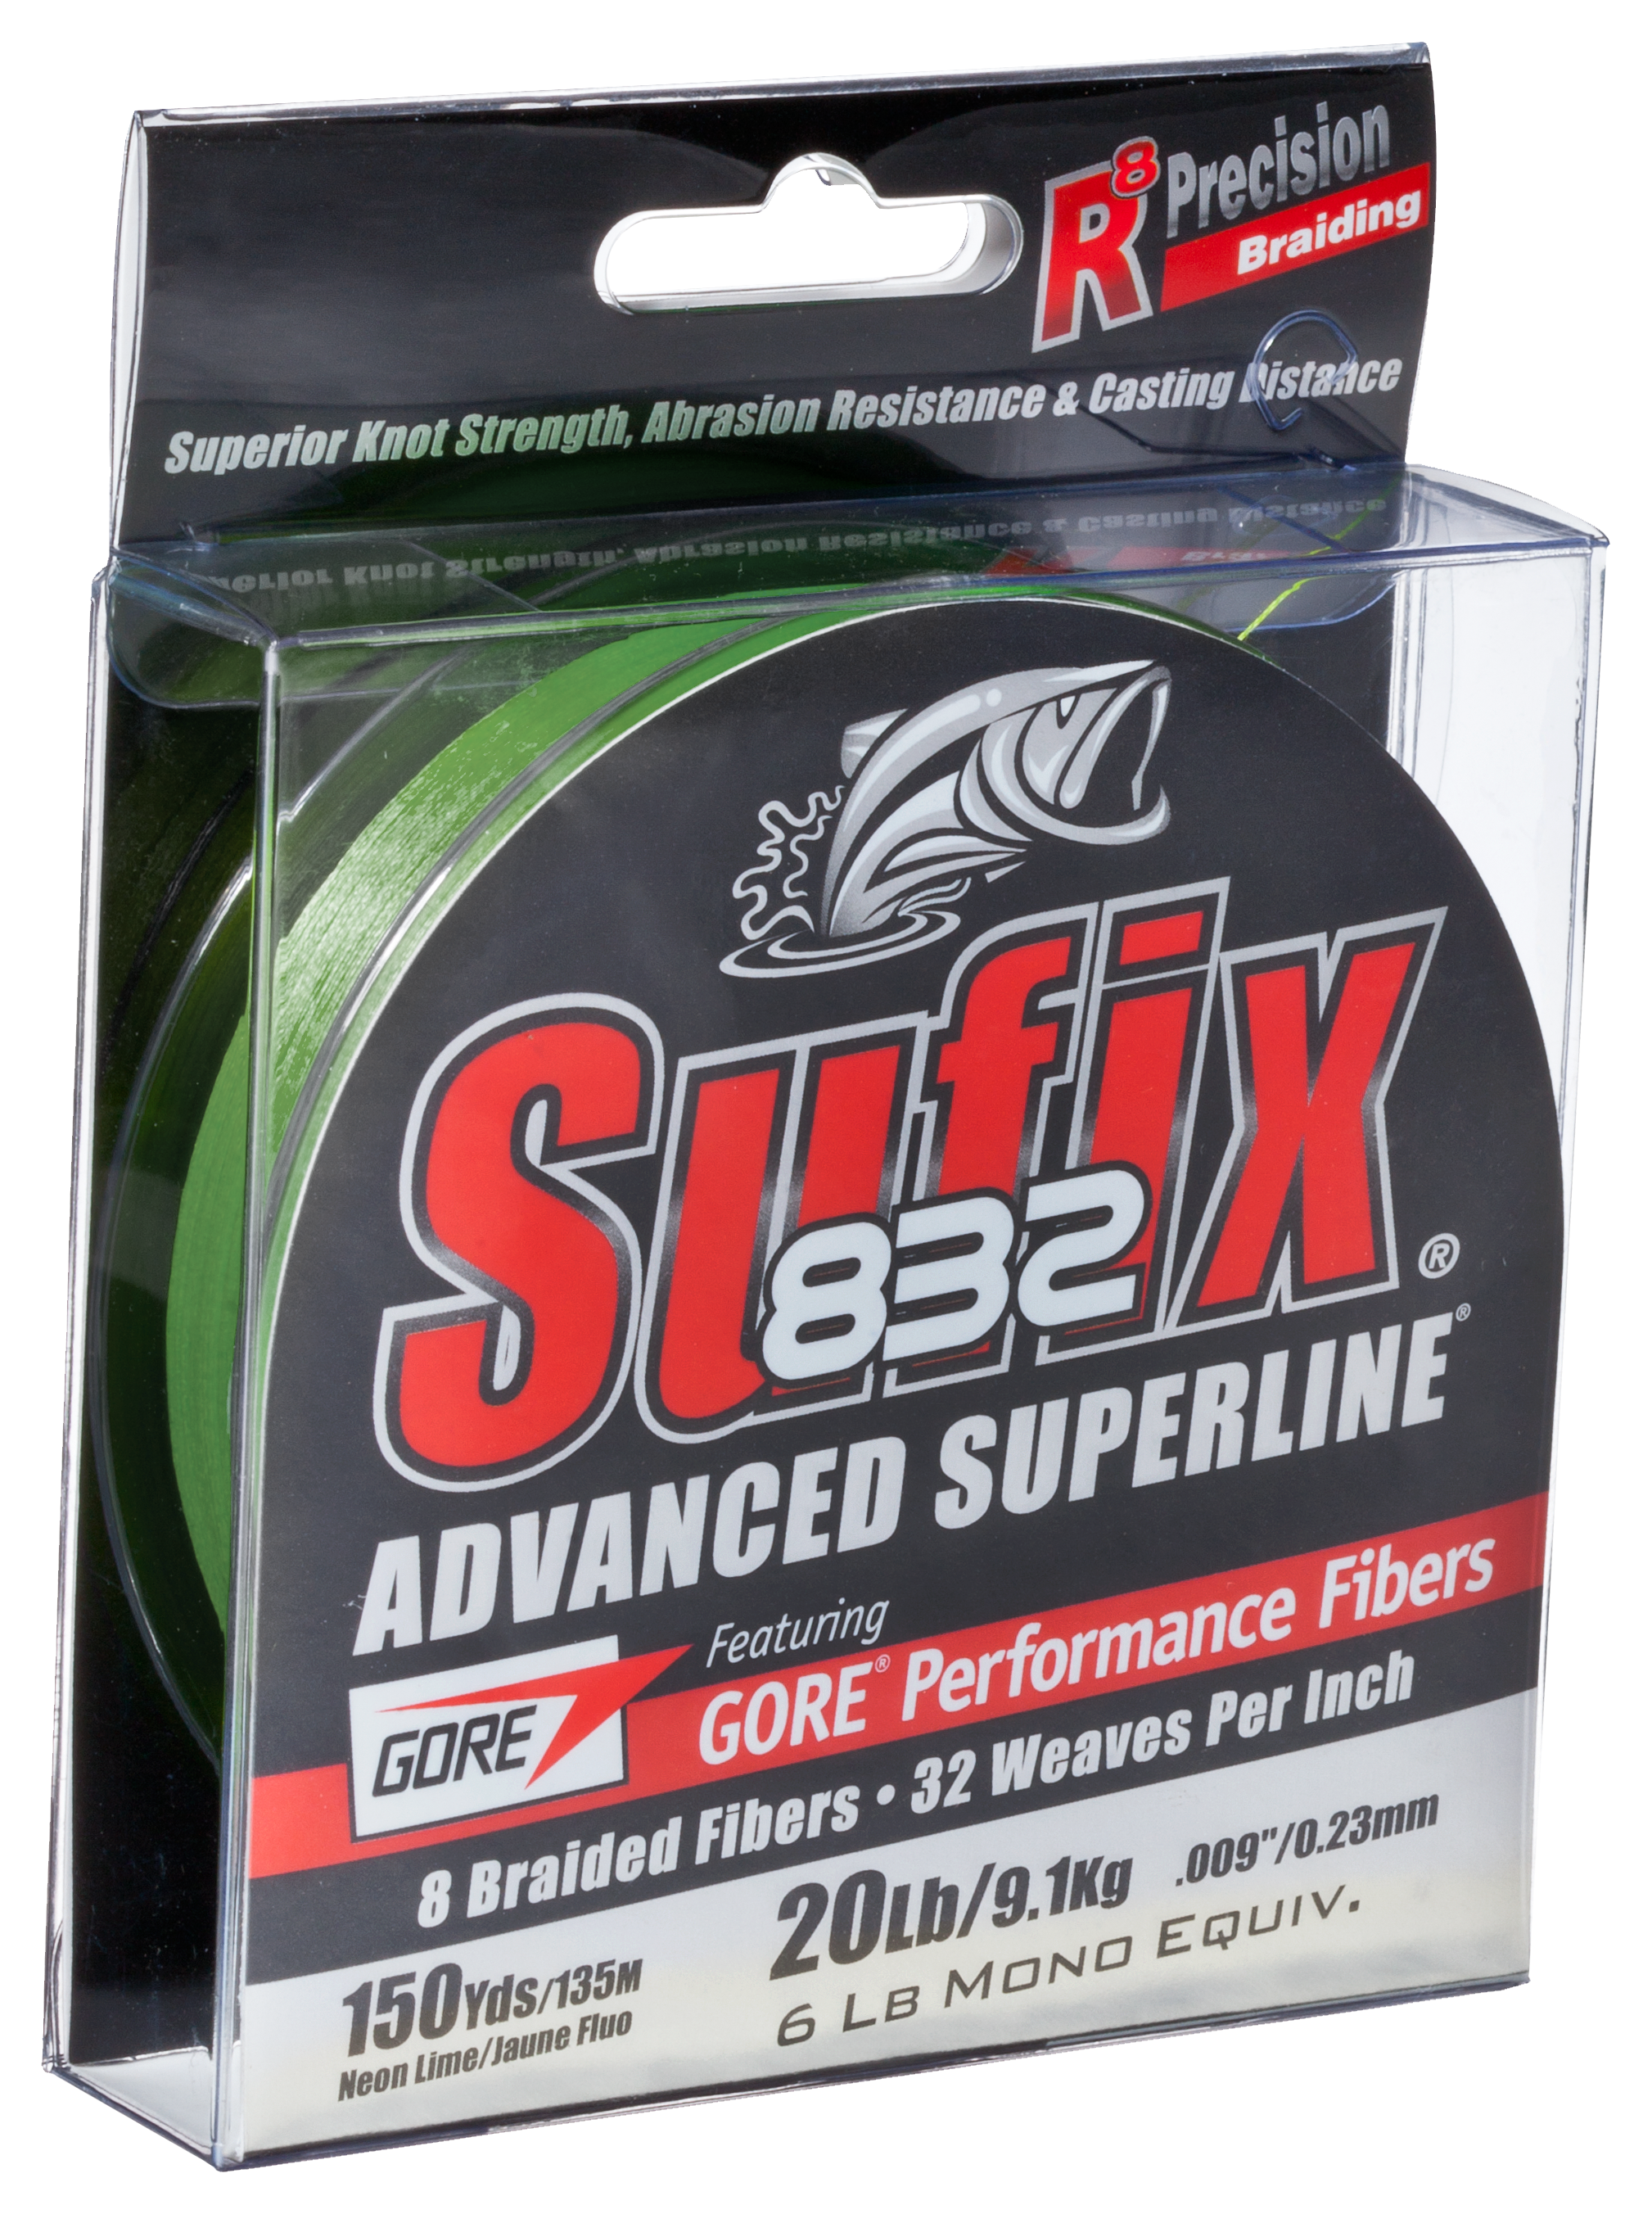 Big Catch Fishing Tackle - Sufix Synergy Line